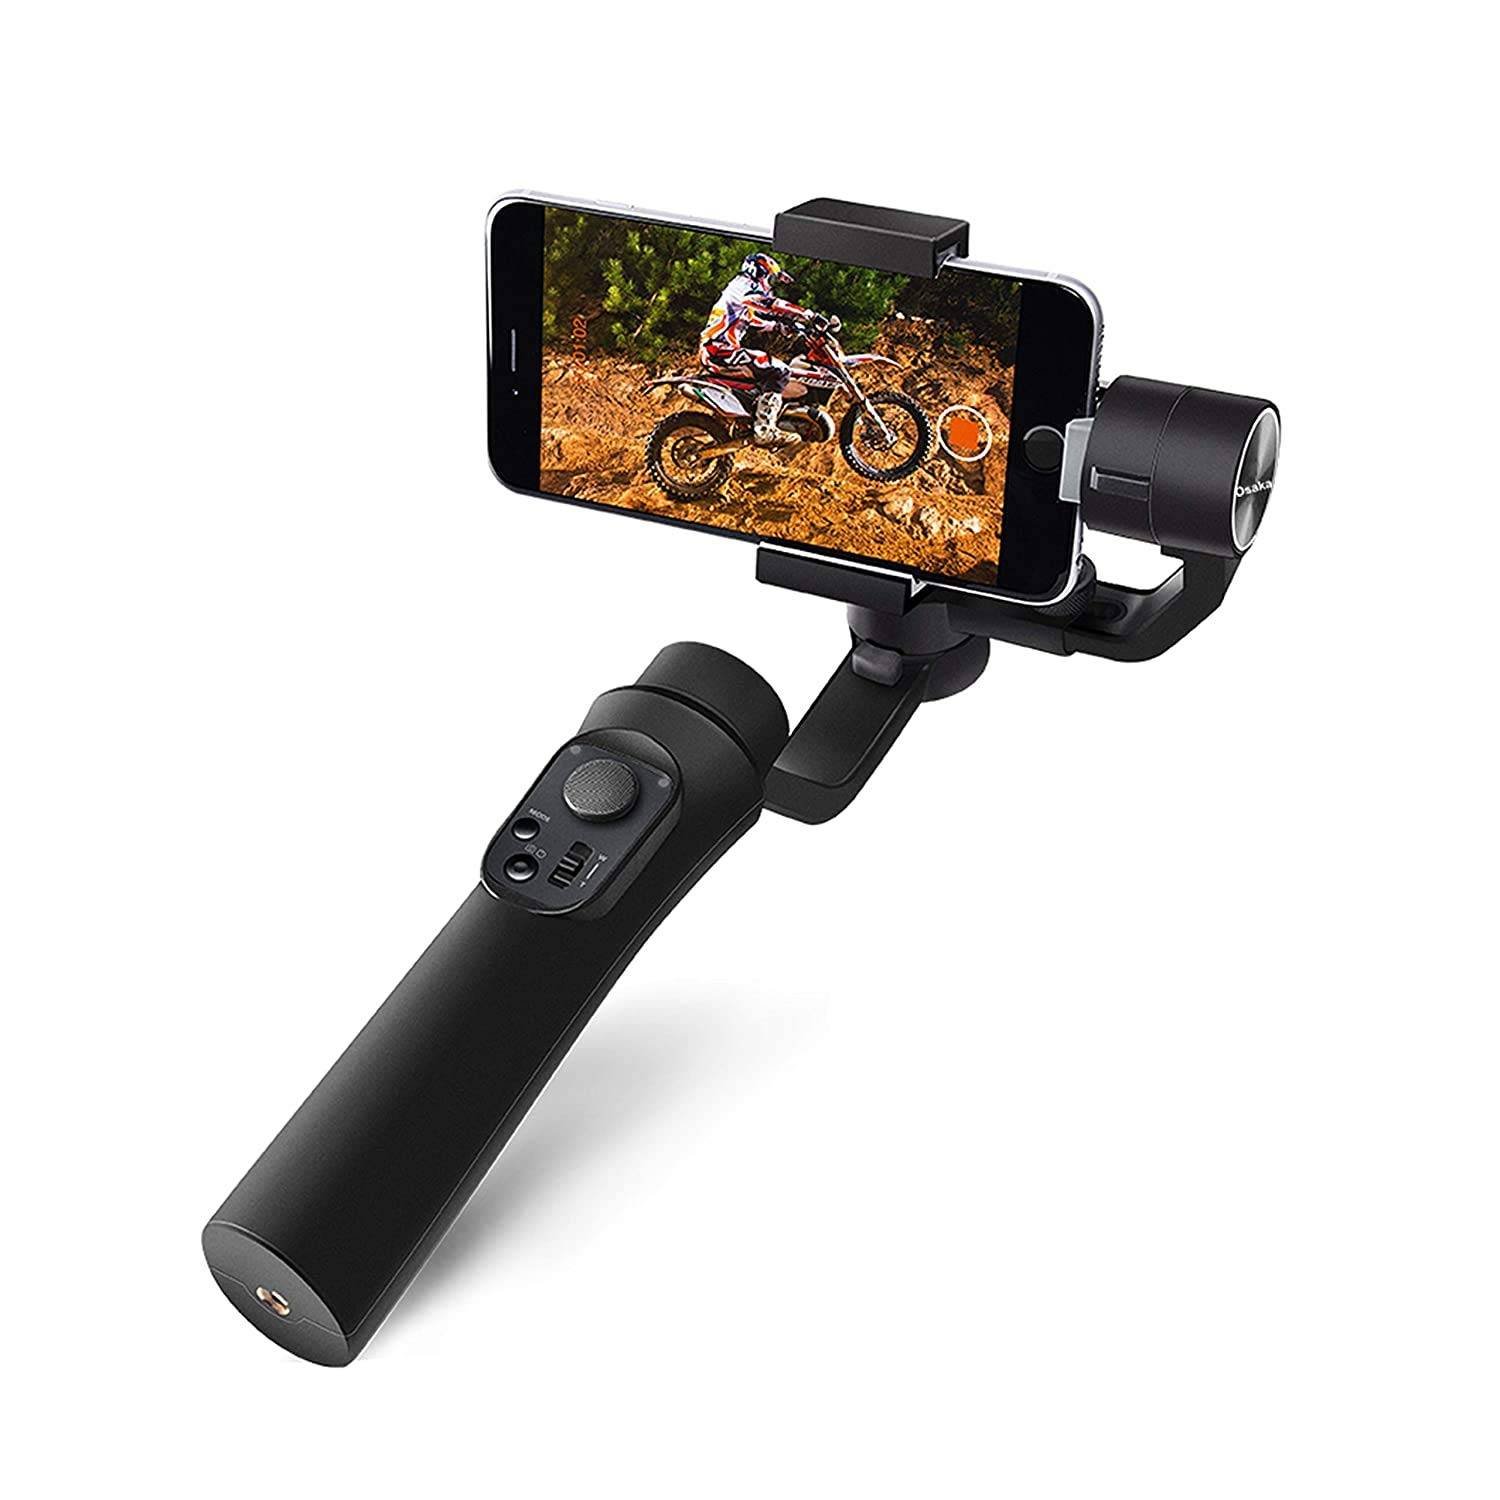 Smartphone Gimbal at upto 70% Discount | Emi option available